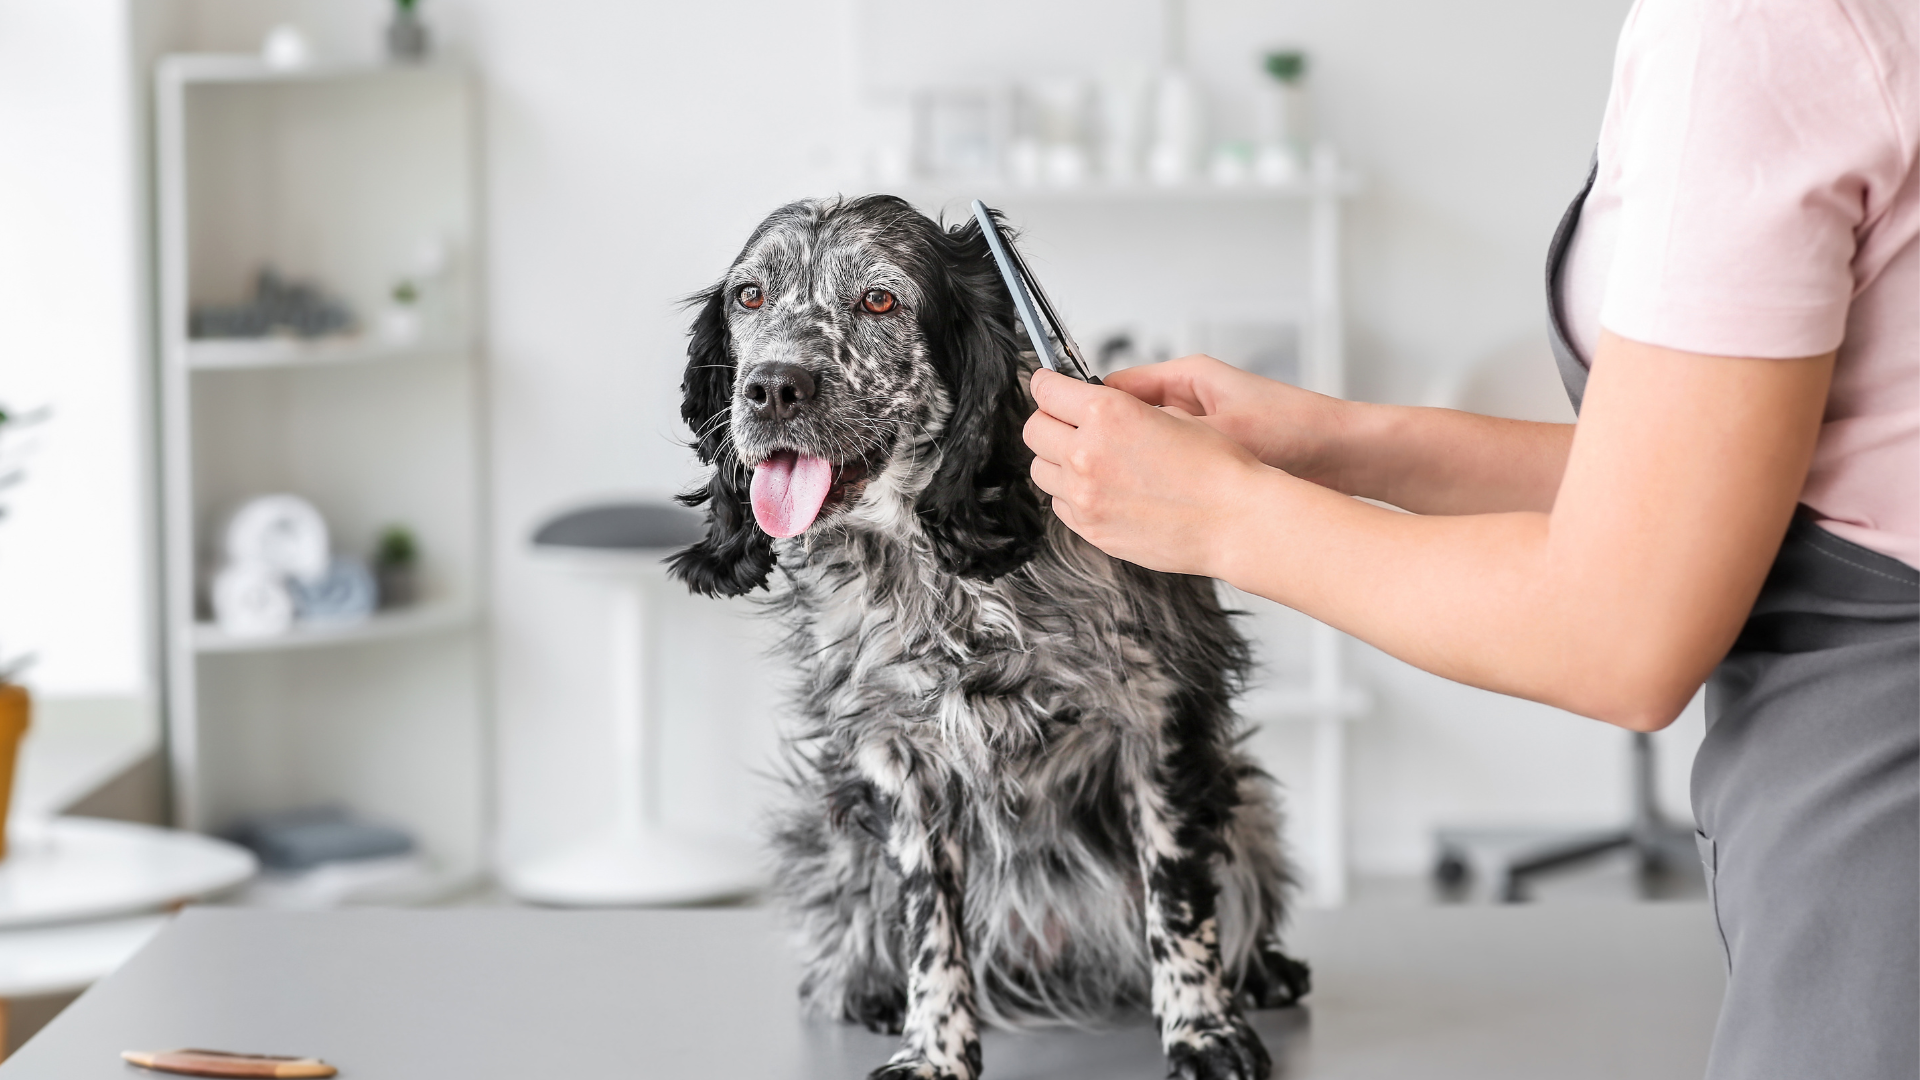 Dog Groomer clipping a black and white dog